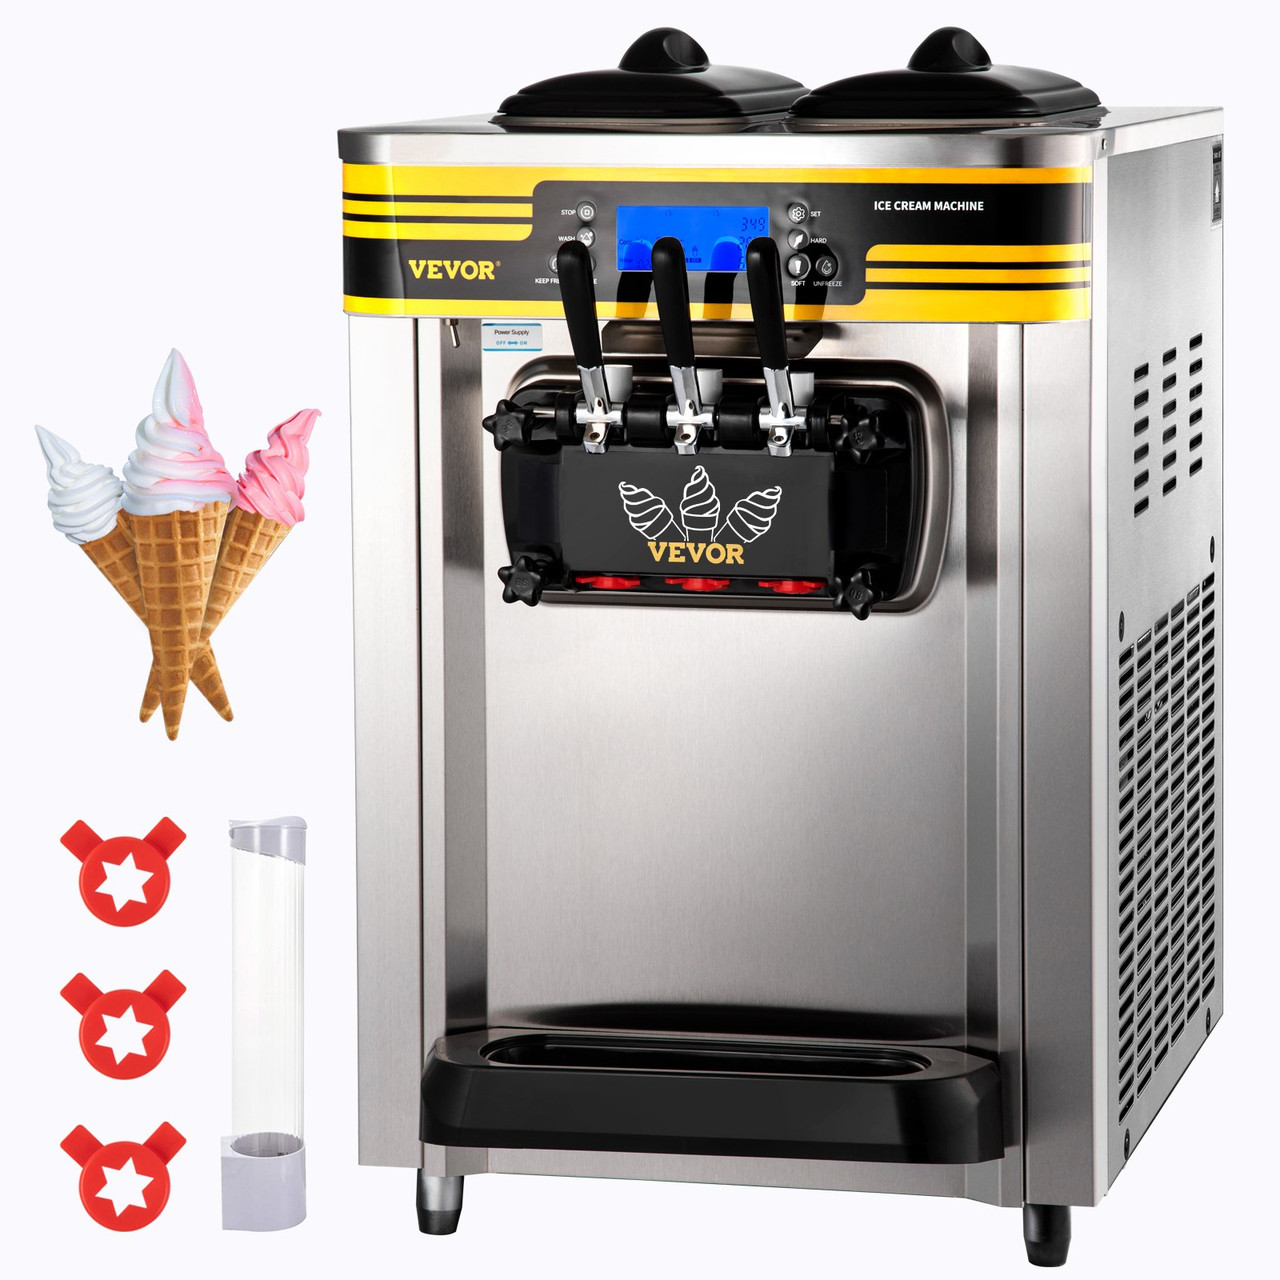 Commercial Ice Cream Maker, 22-30L/H Yield, 2350W Countertop Soft Serve Machine w/ 2x6L Hopper 2L Cylinder LCD Panel Puffing Shortage Alarm, Frozen Yogurt Maker for Restaurant Snack Bar, Silver